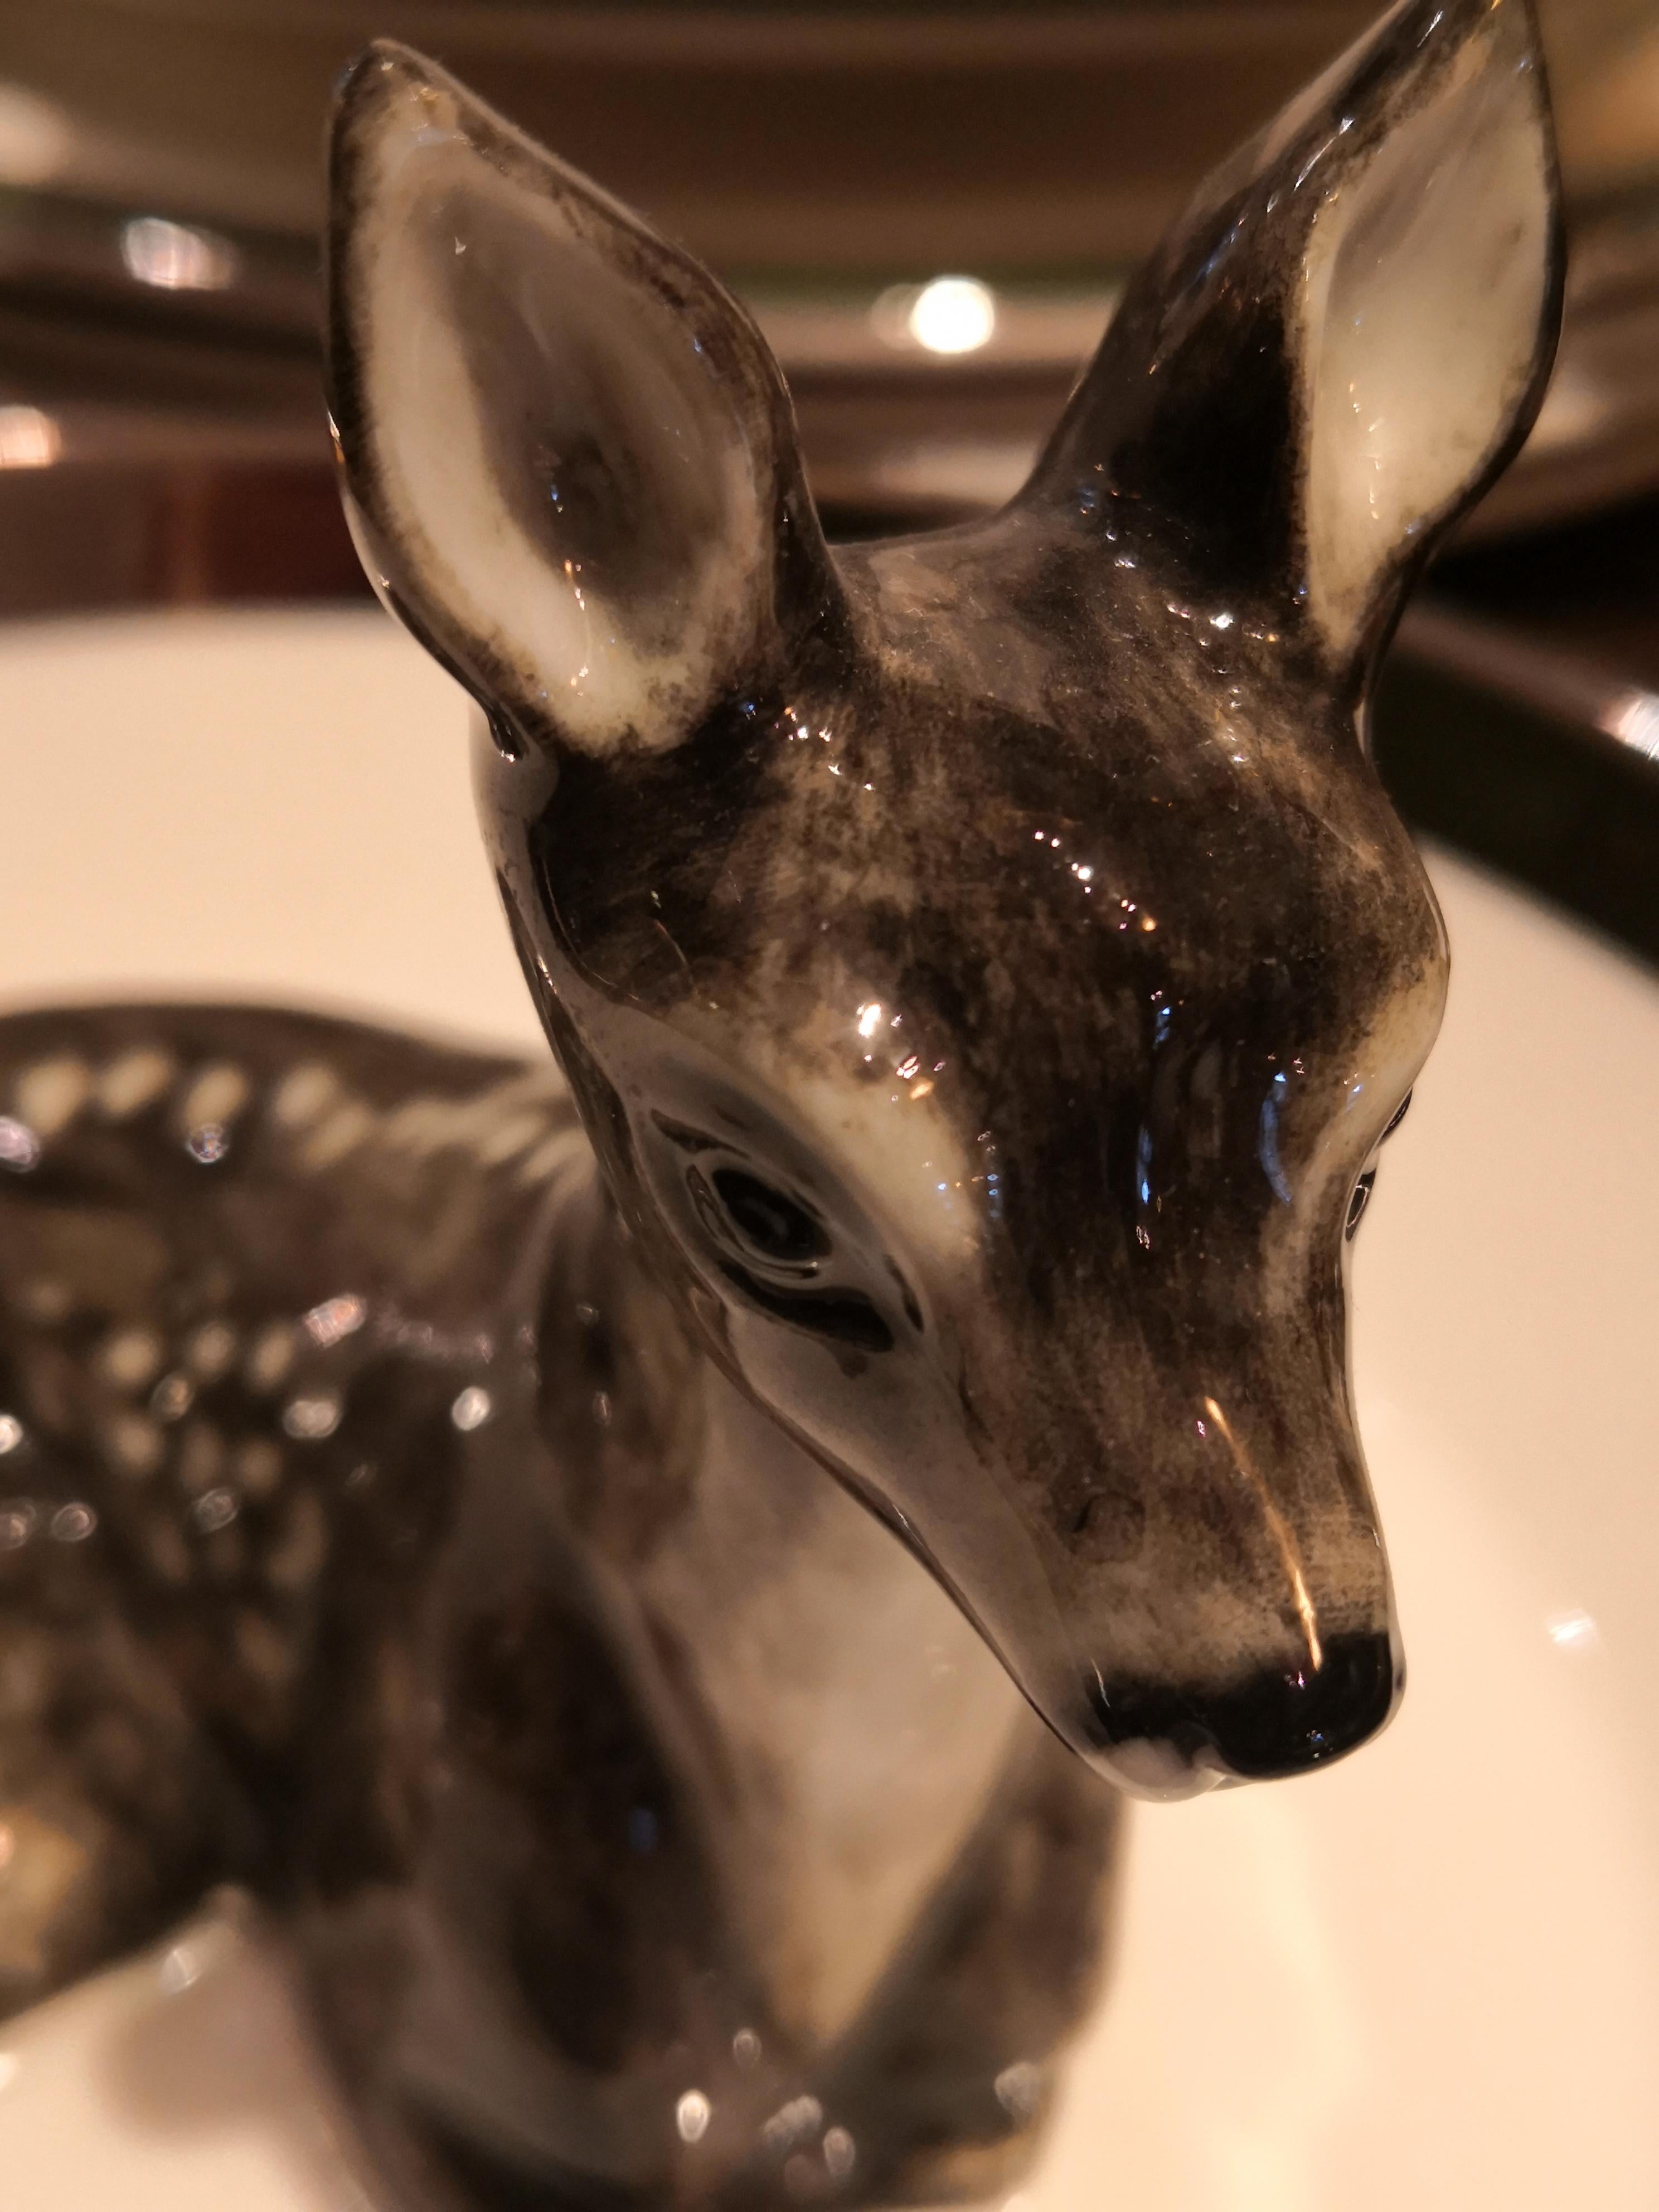 Completely handmade porcelain bowl with a hands-free painted bambi in the center of the bowl. The charming bambi figure is hand painted in black and sits in the middle of the dish. The porcelain dish is platinum rimmed by hand. Comes also with a